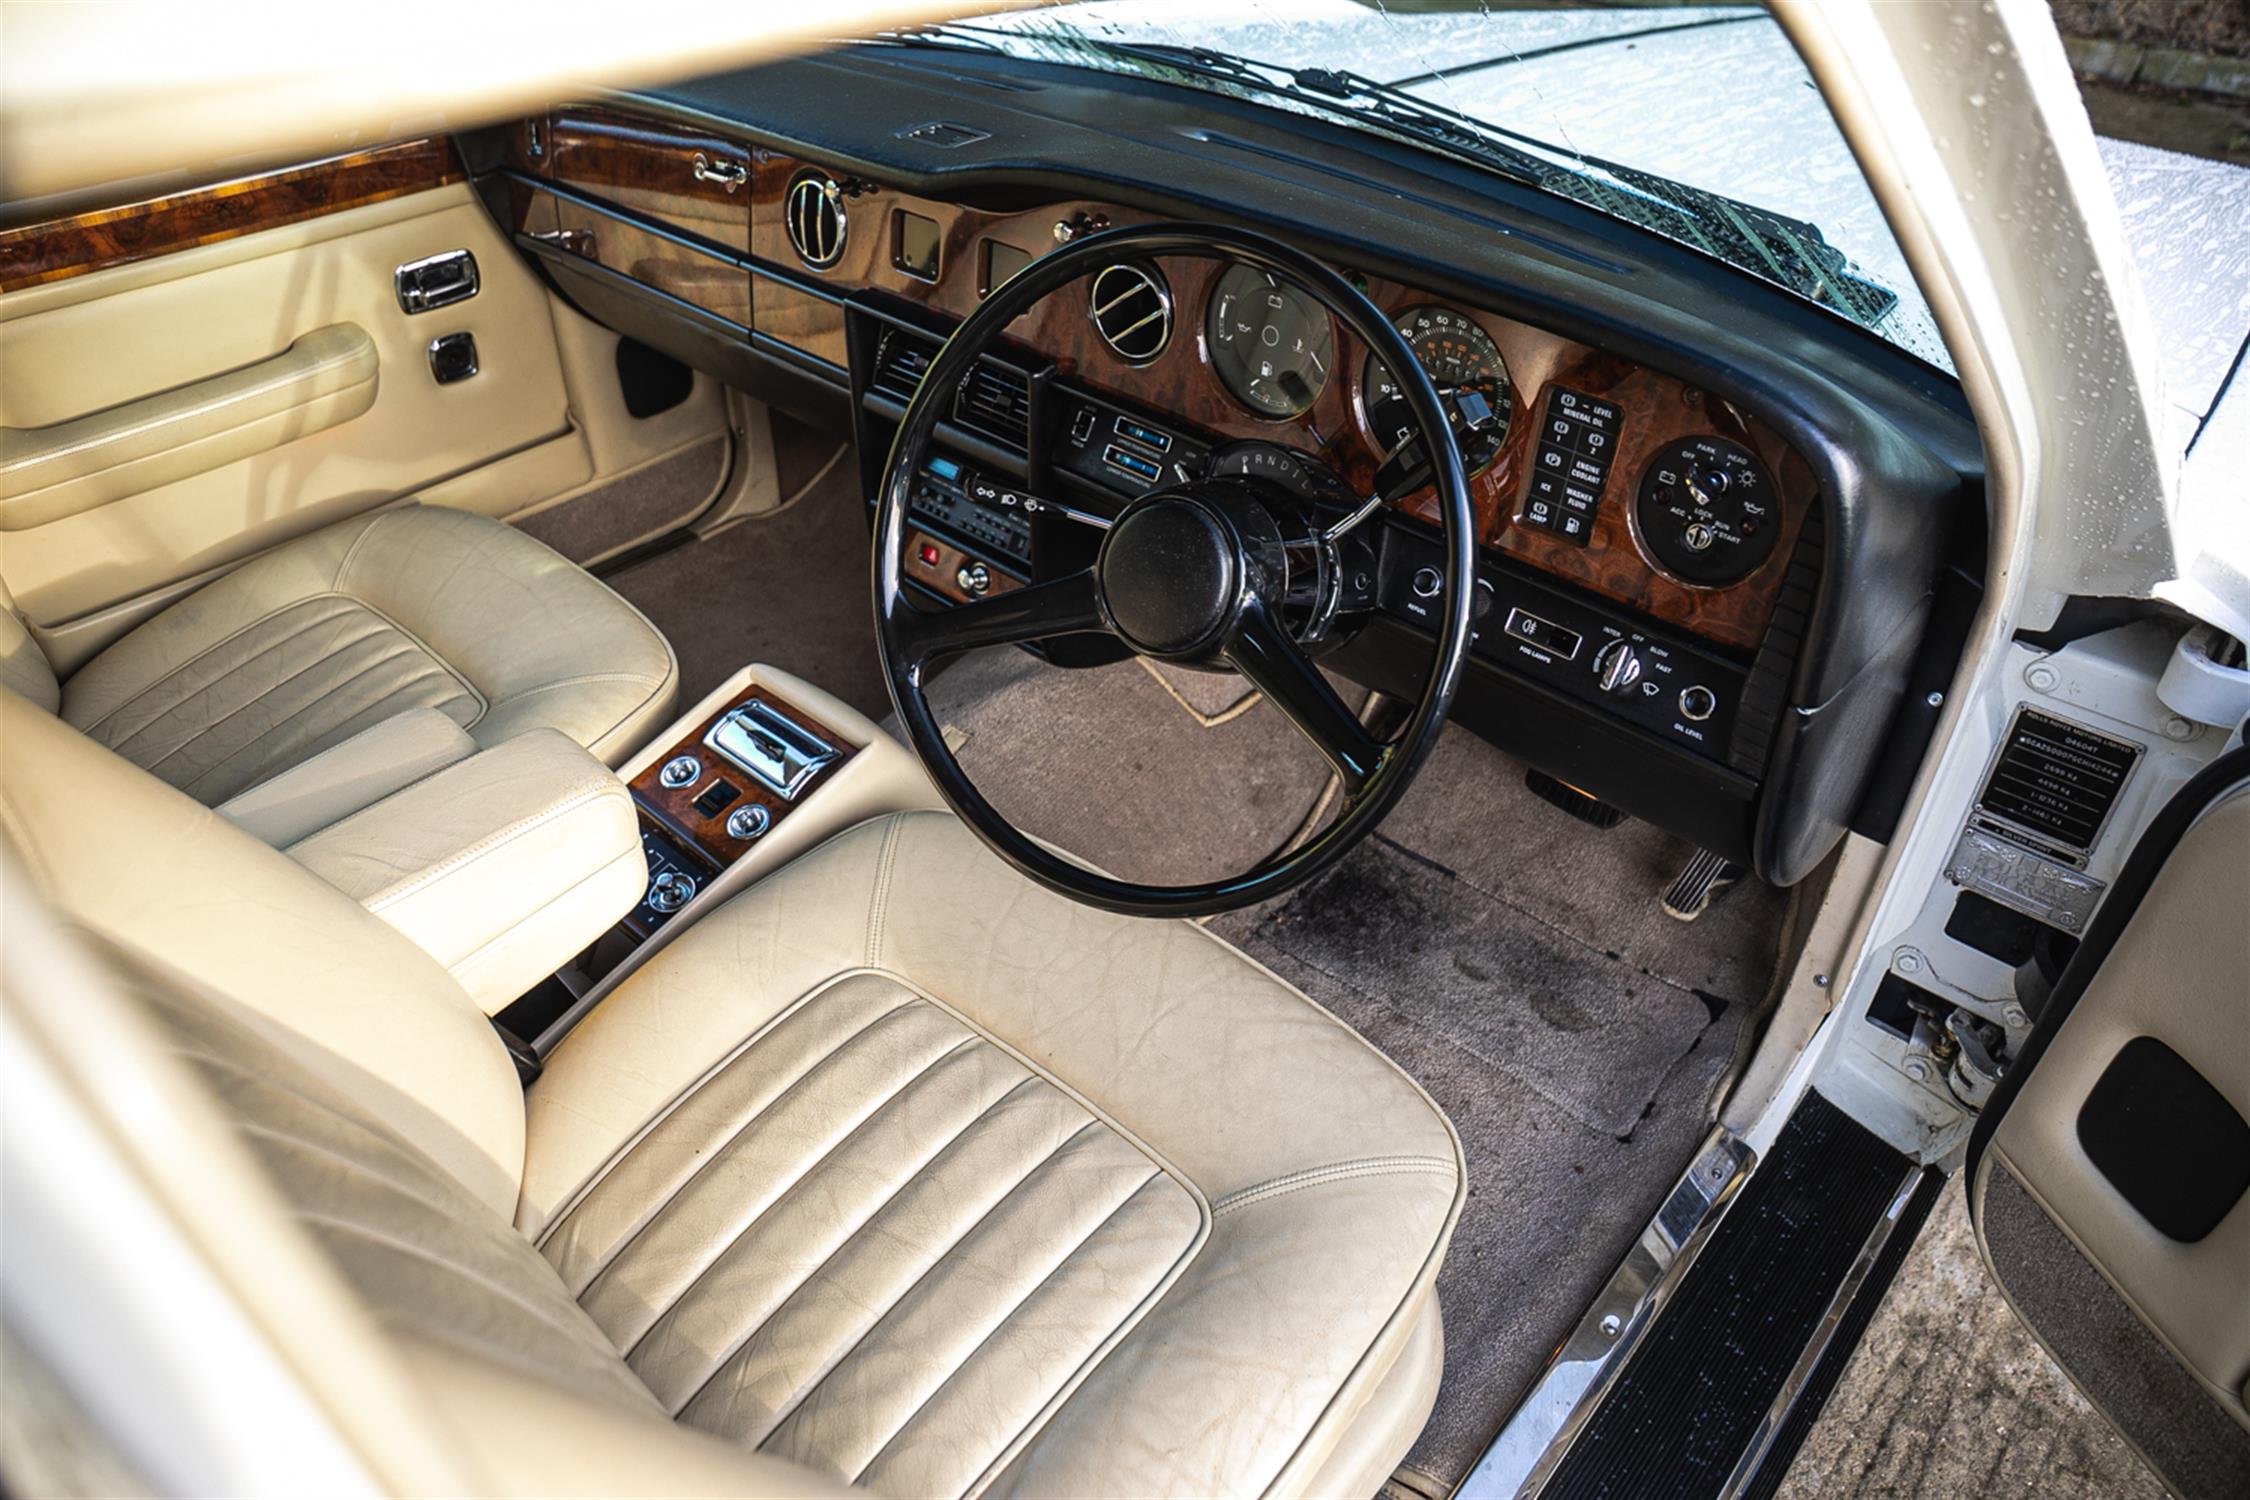 1985 Rolls-Royce Silver Spirit - One Owner - Image 2 of 10